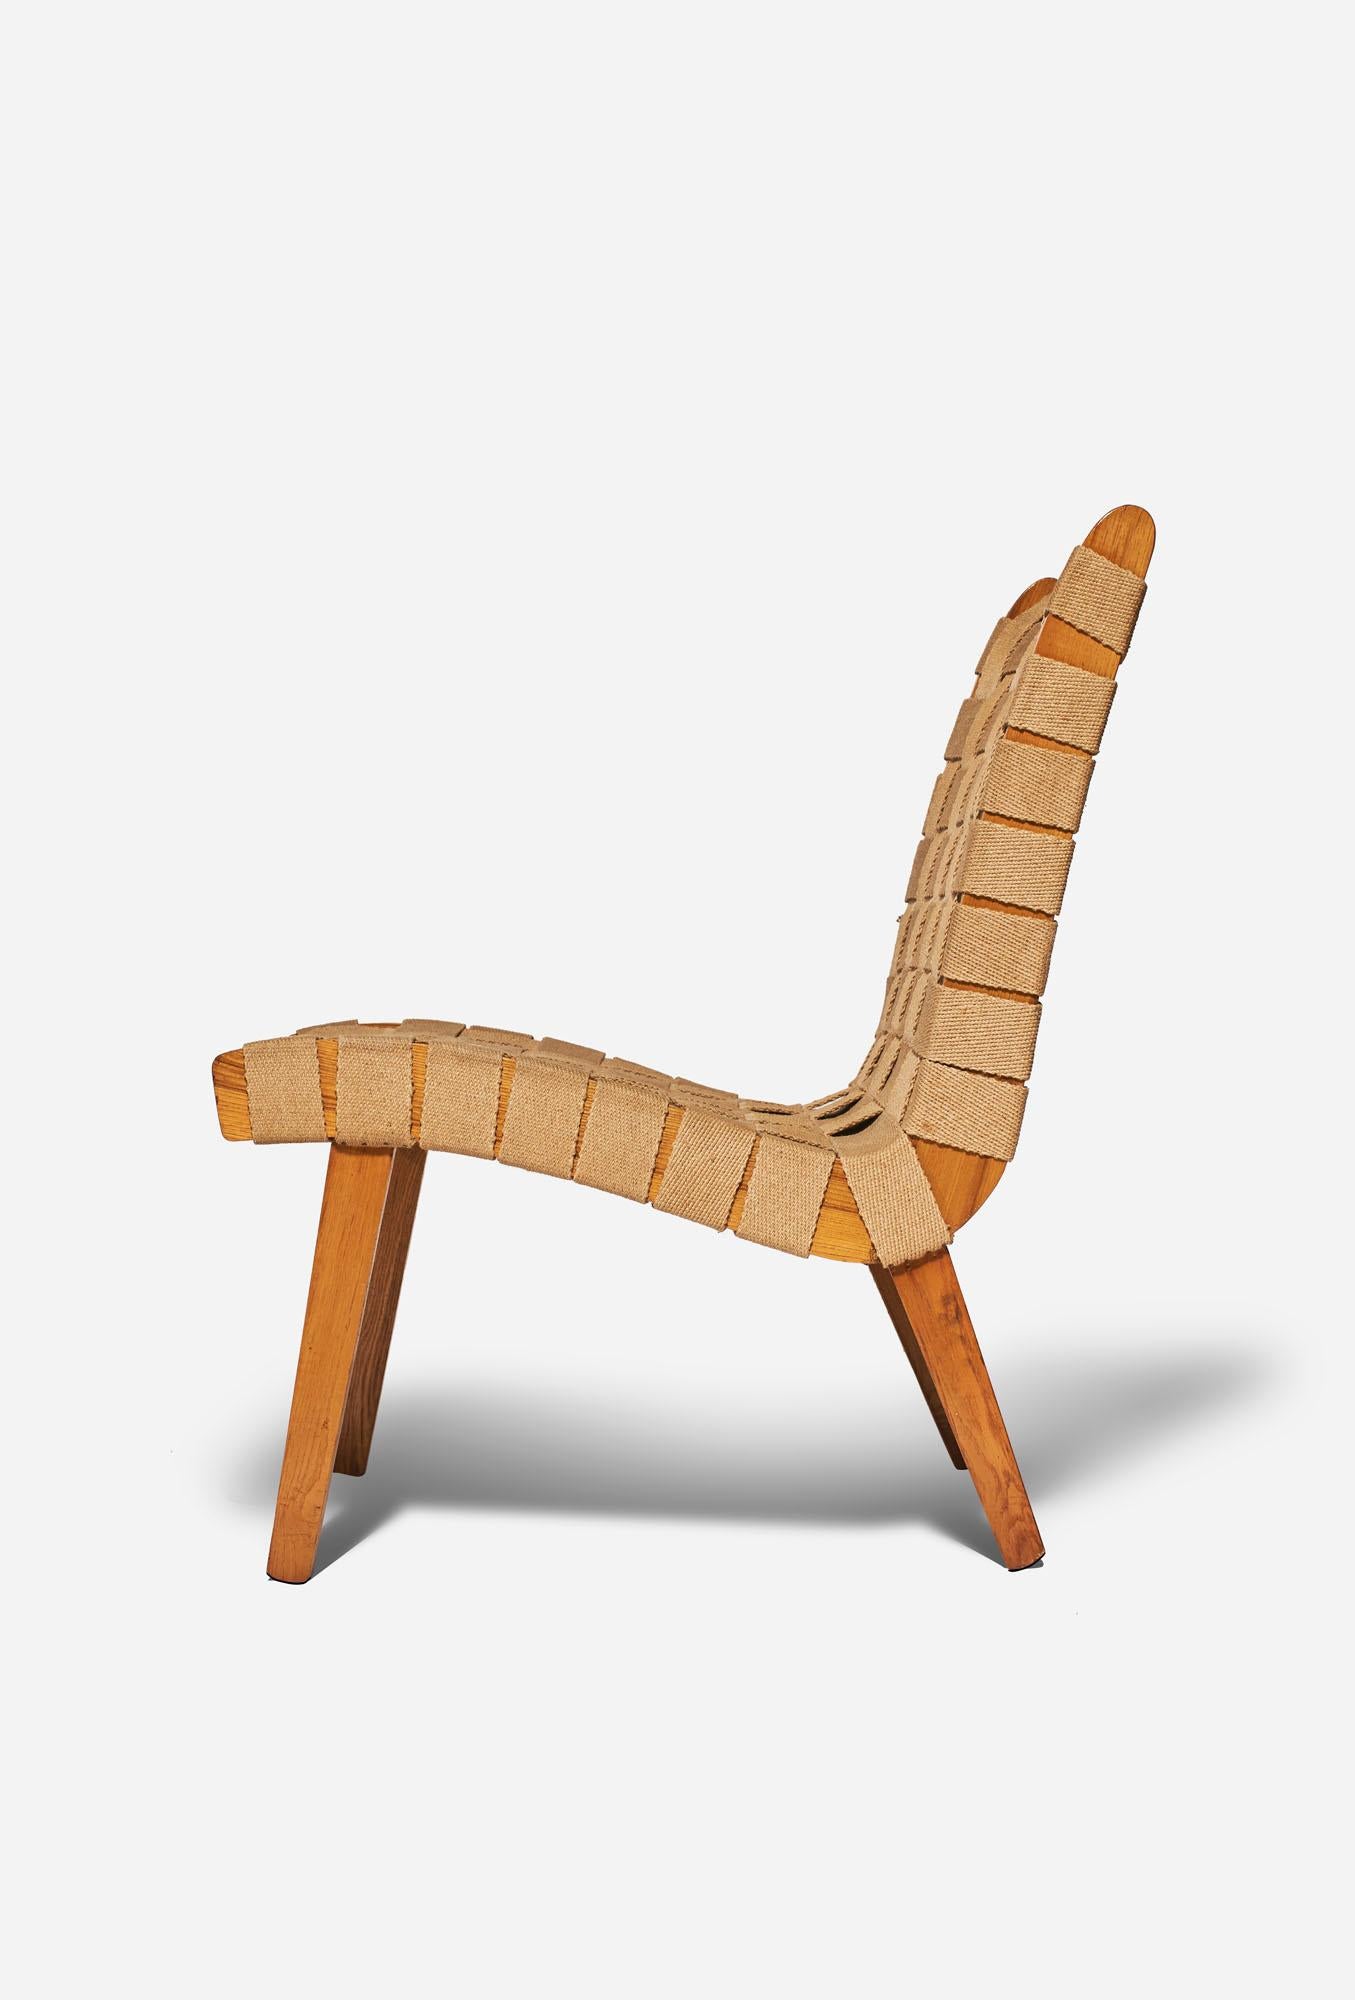 Jens Risom style lounge chair, 1960s, Europe.
Ashwood and canvas. Original condition.